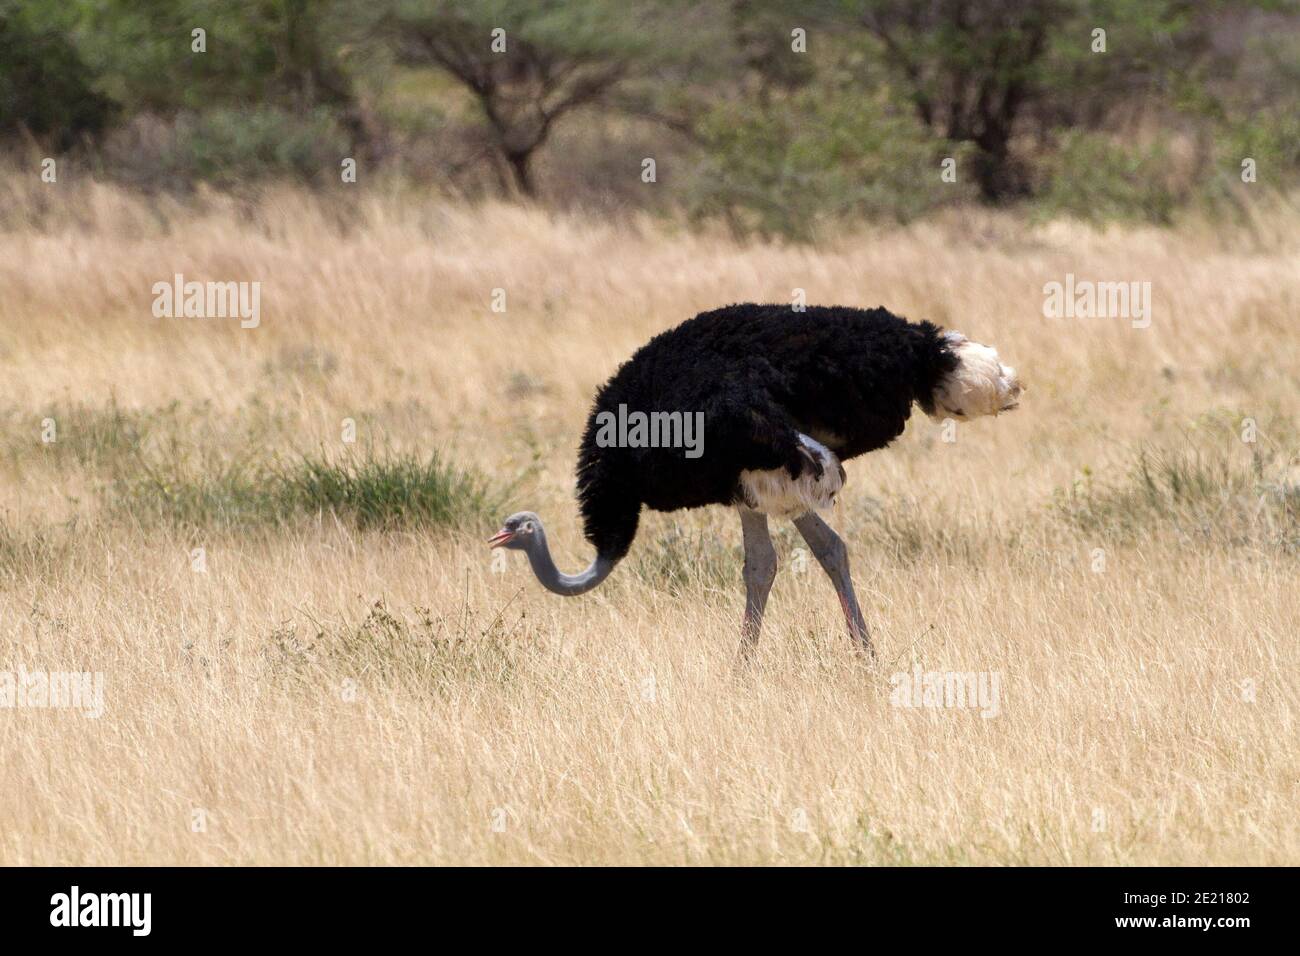 The Somali ostrich (Struthio molybdophanes), also known as the blue-necked ostrich, is a large flightless bird native to the Horn of Africa.[2] It was Stock Photo